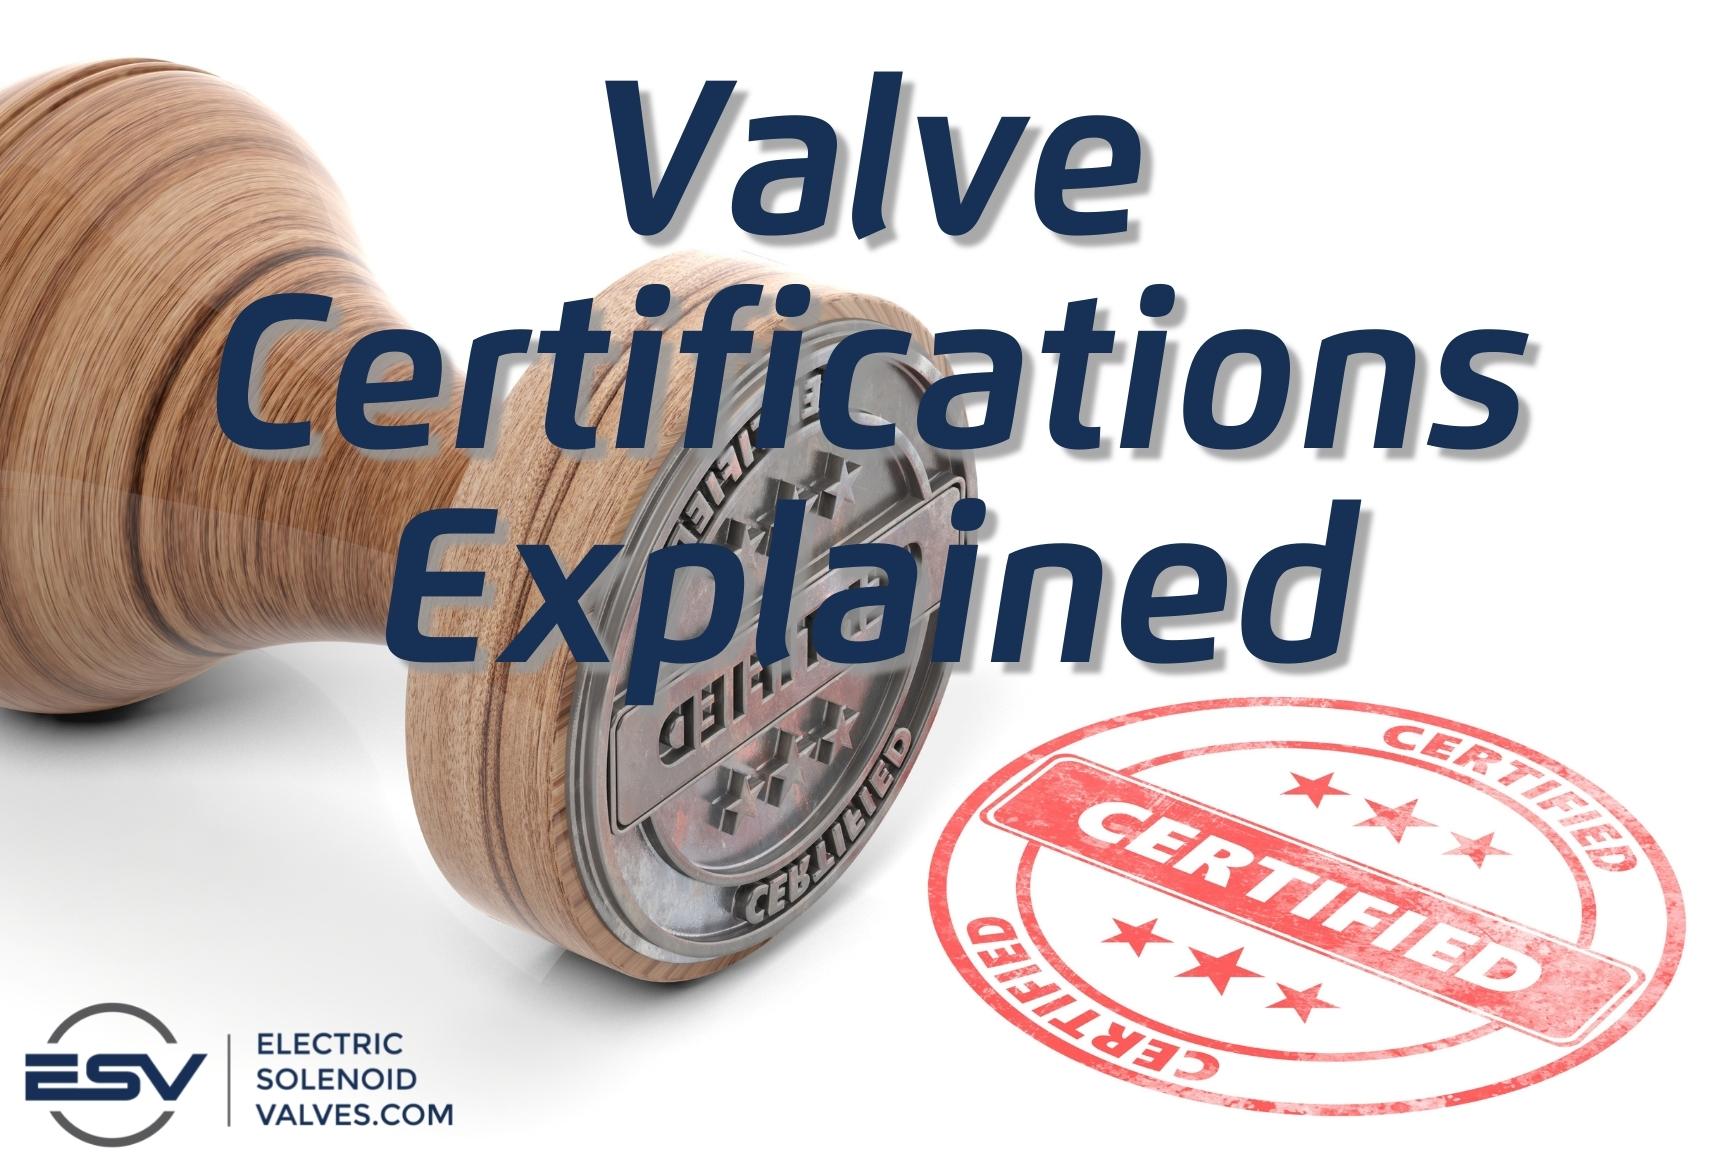 Valve certifications explained 